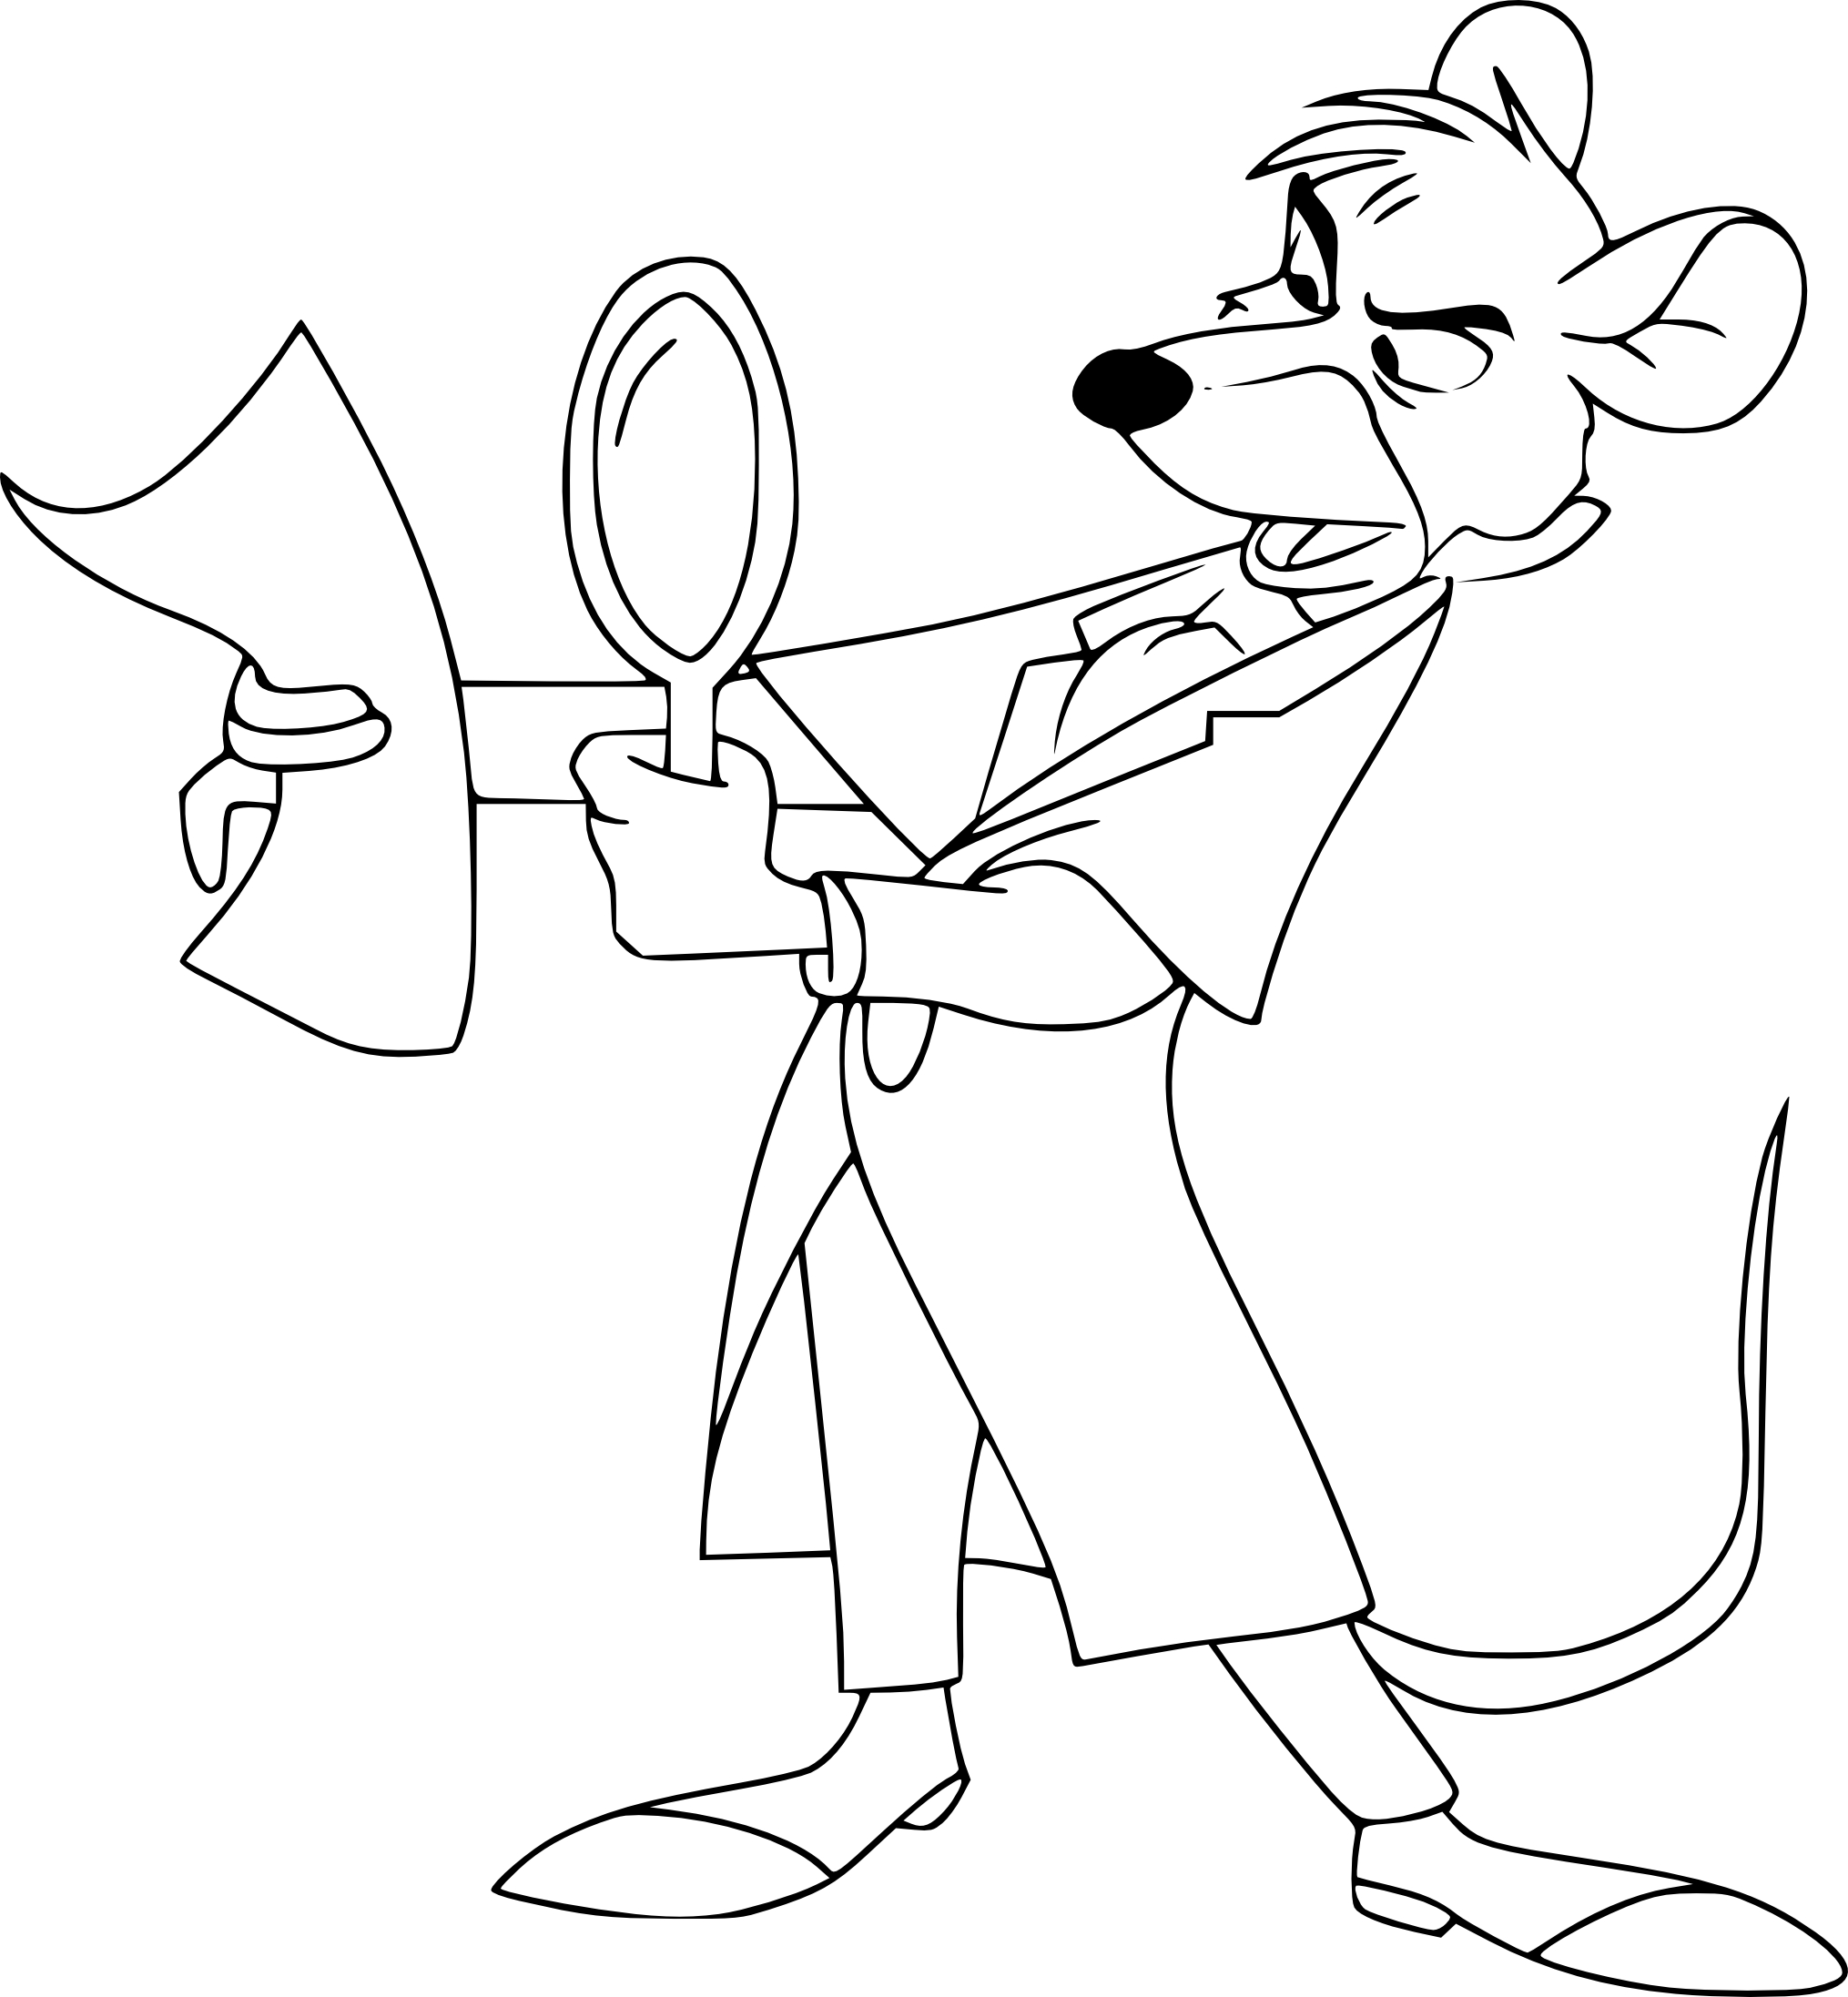 Basil Private Detective coloring page